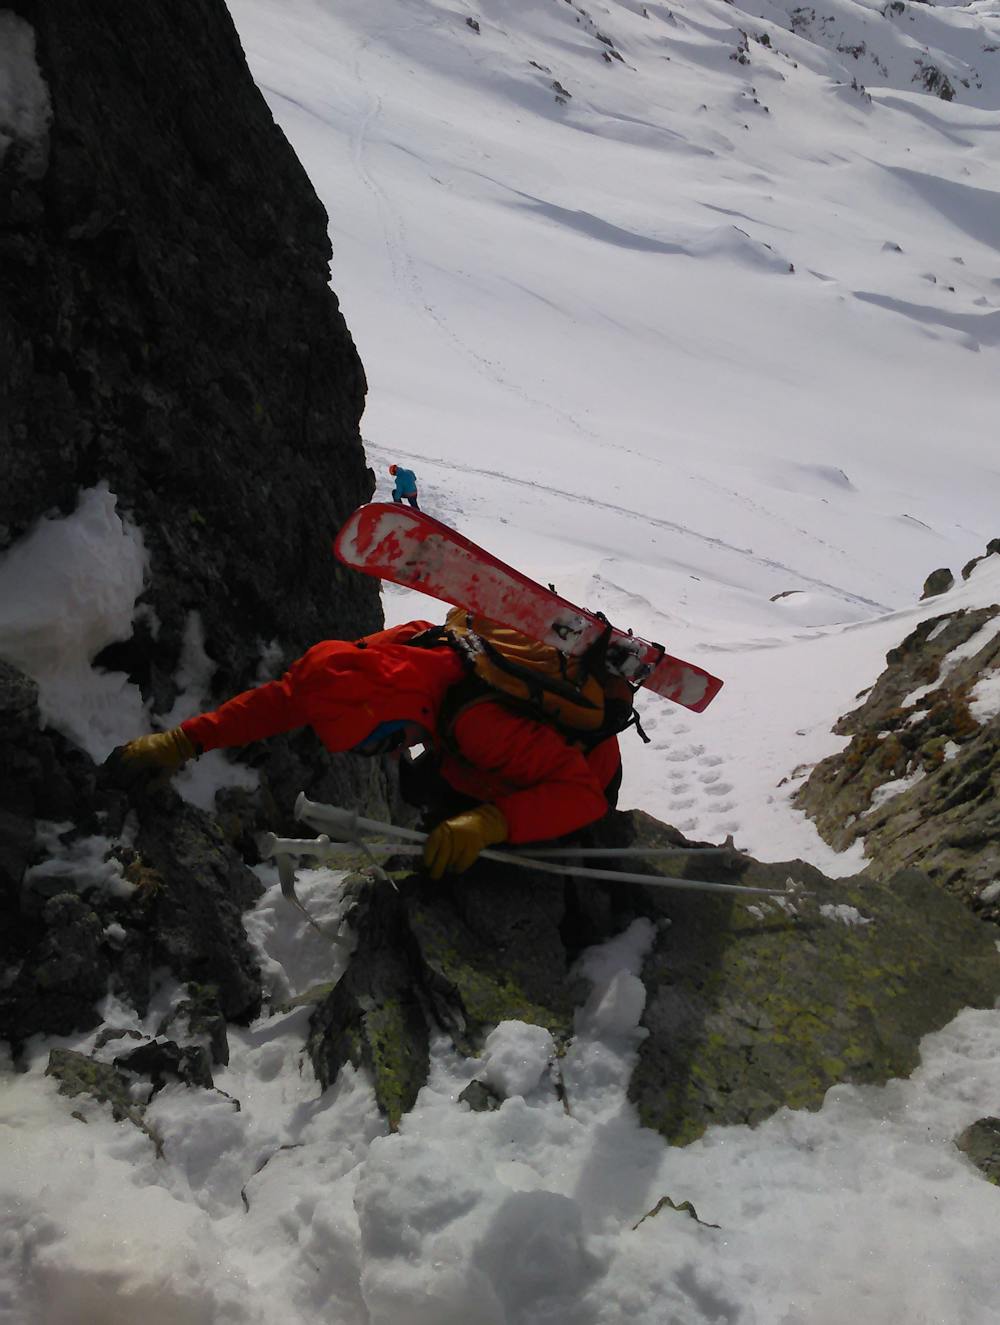 Scrambling up to the Brêche